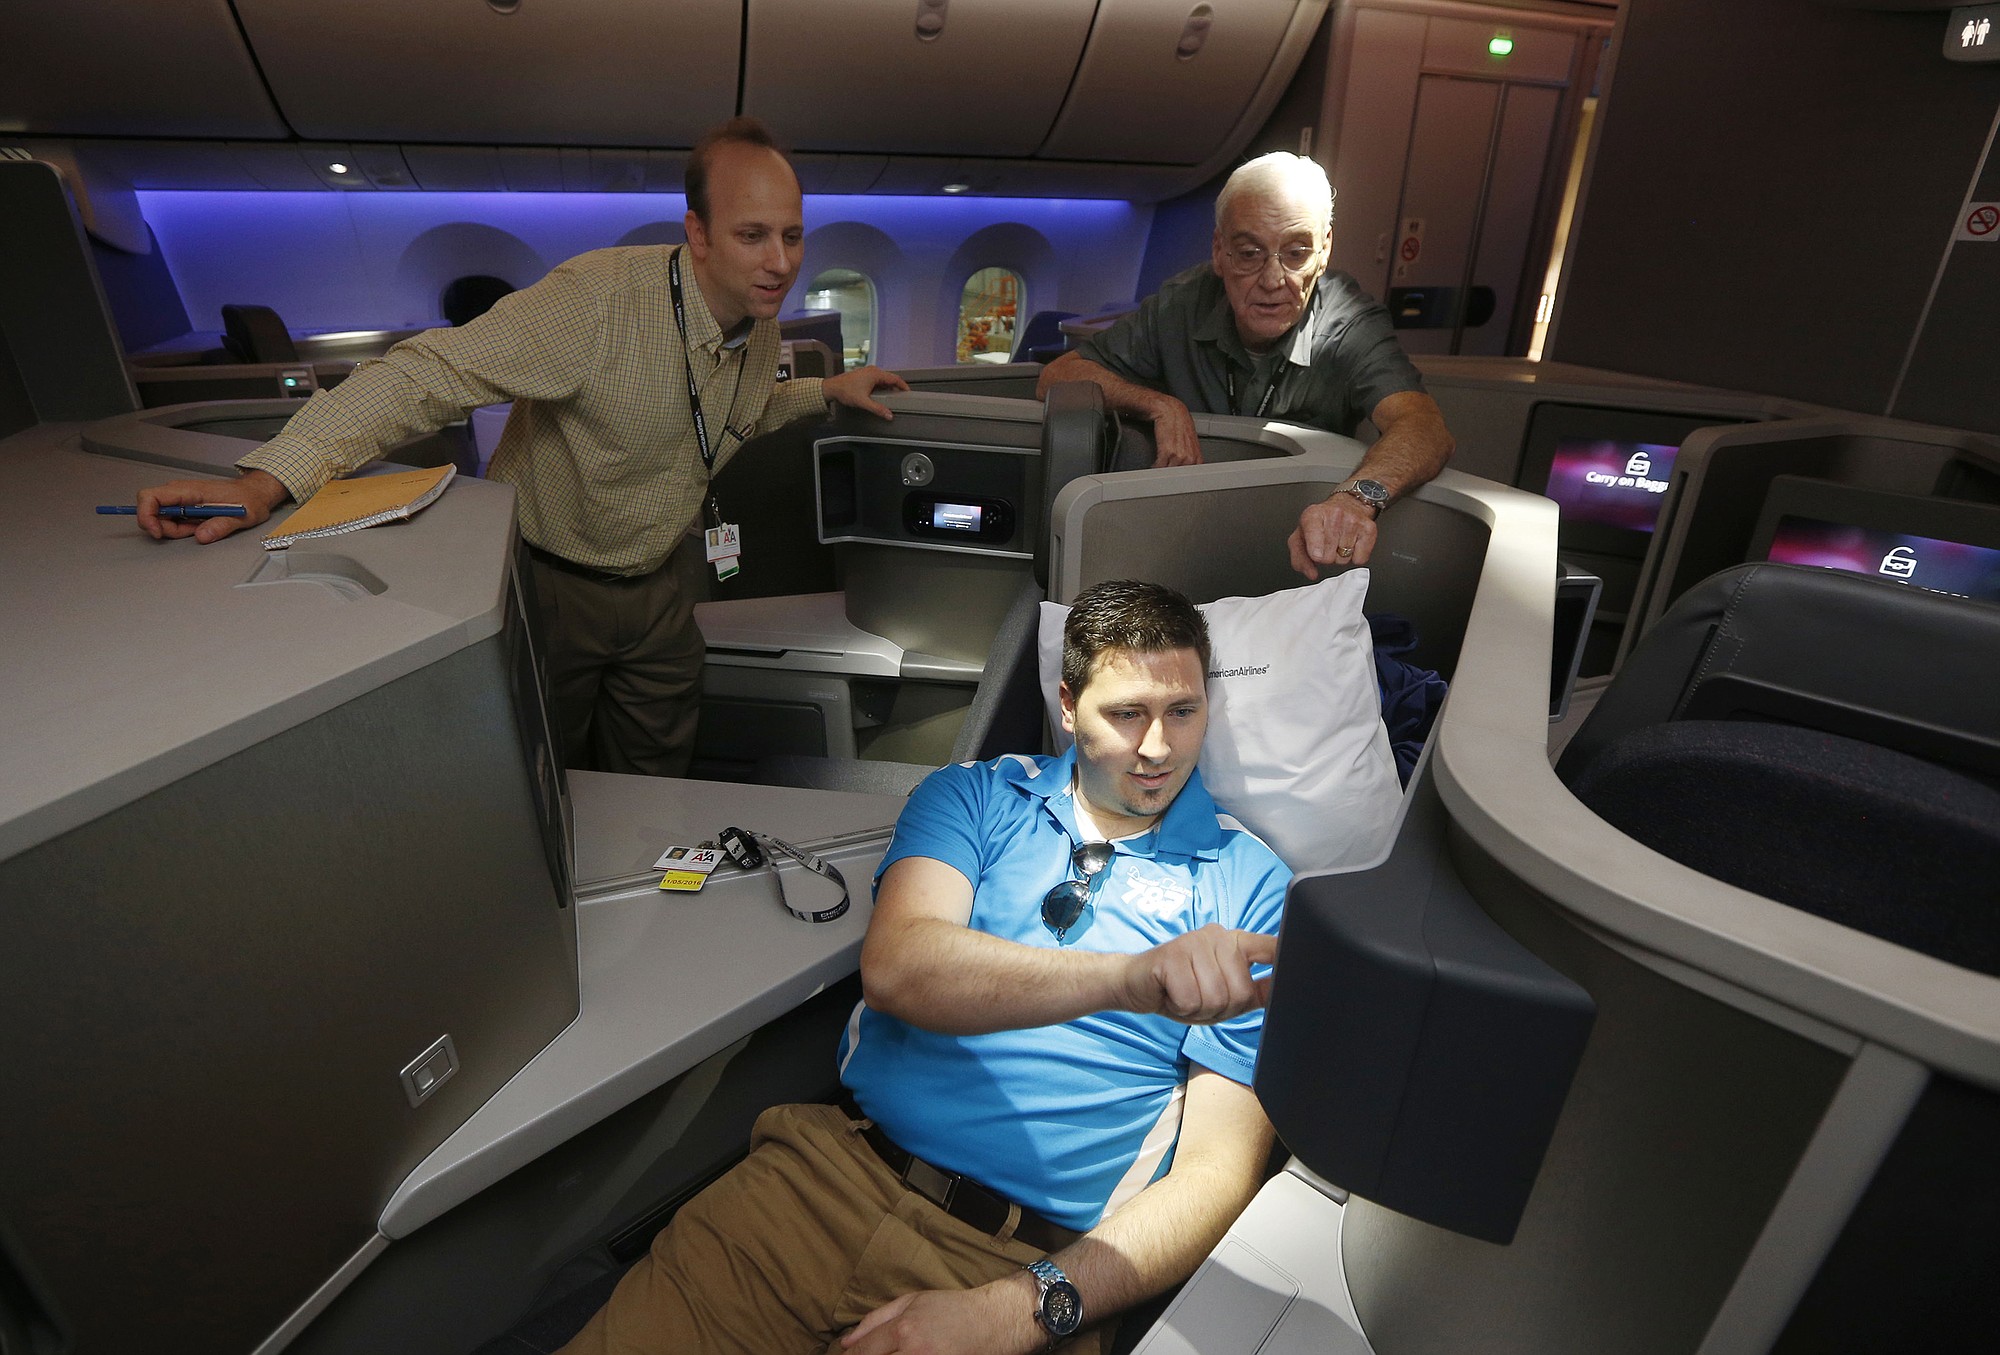 American Airlines employees Steve Kmetz, from left, Frank Hettlinger and Norm Rainwater look at in-flight entertainment in the business class section during a media tour of a Boeing 787.